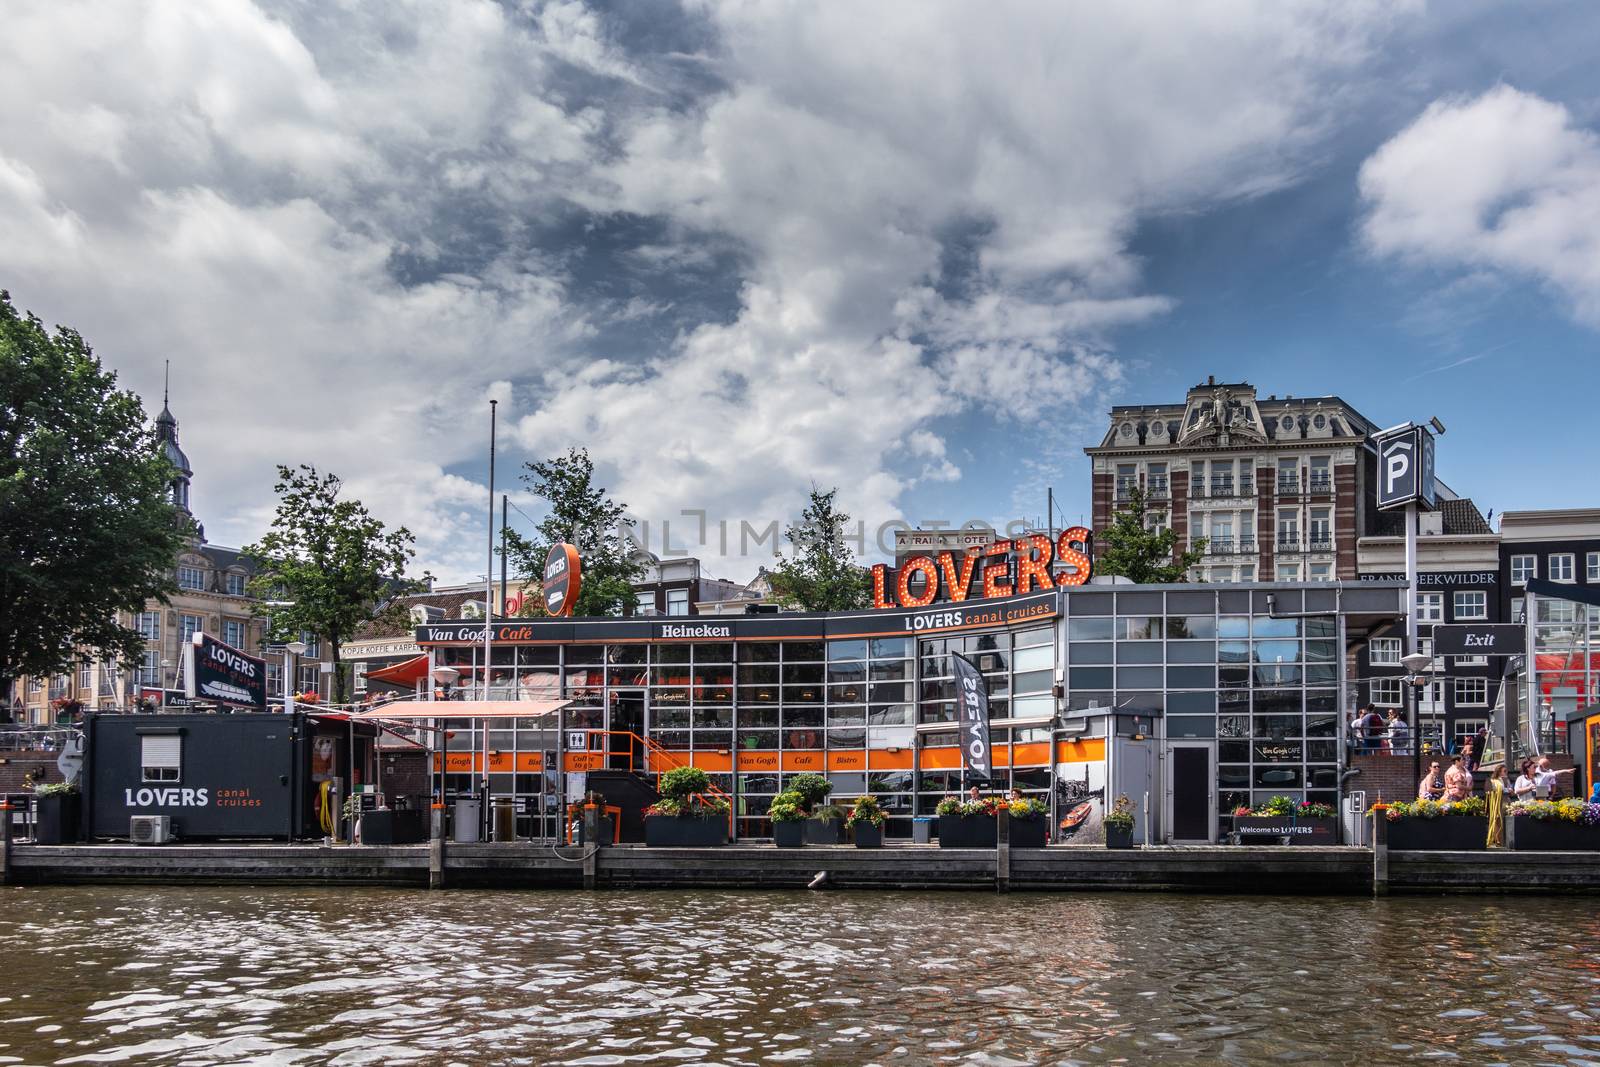 Office of Loverss canal cruises close to Central Railway station by Claudine